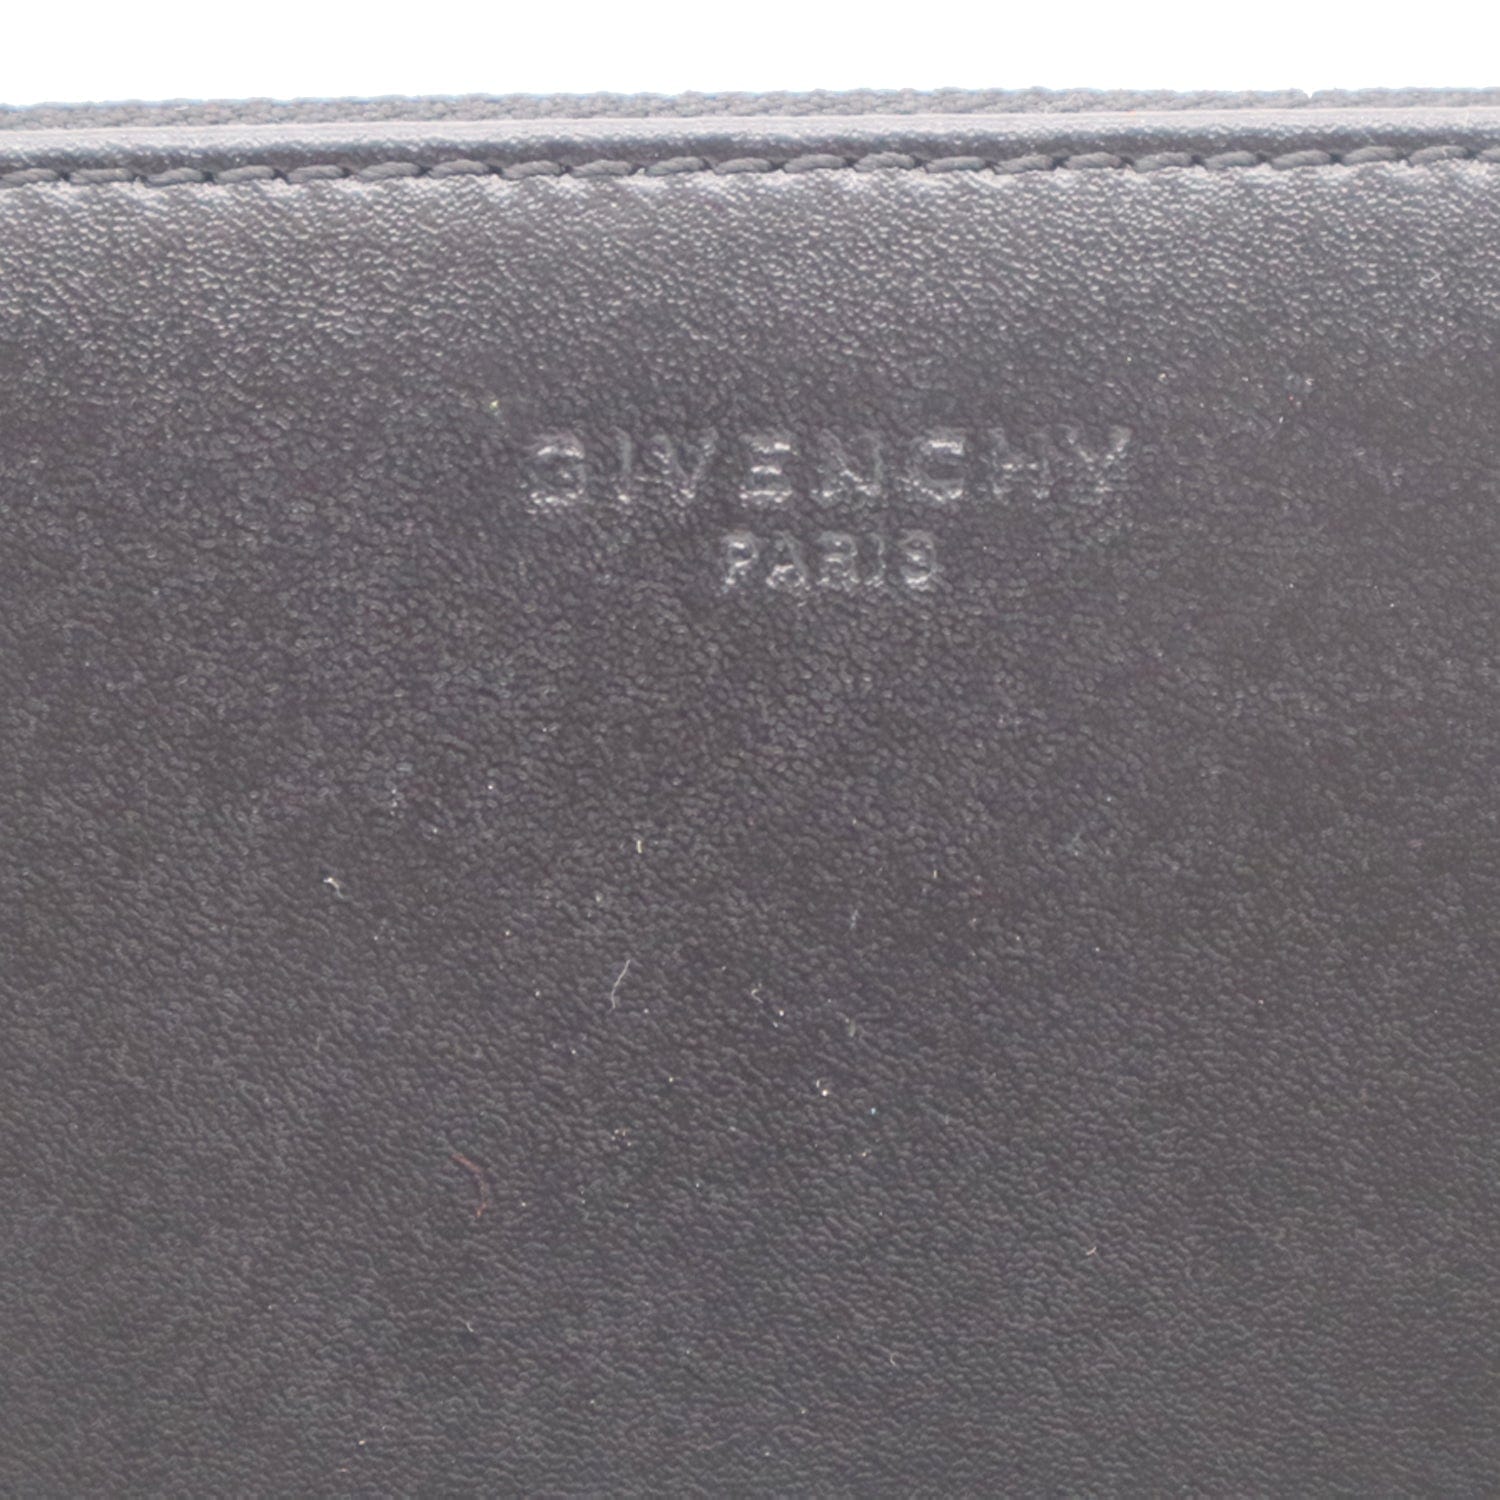 Silver Givenchy Leather Clutch Bag, RvceShops Revival